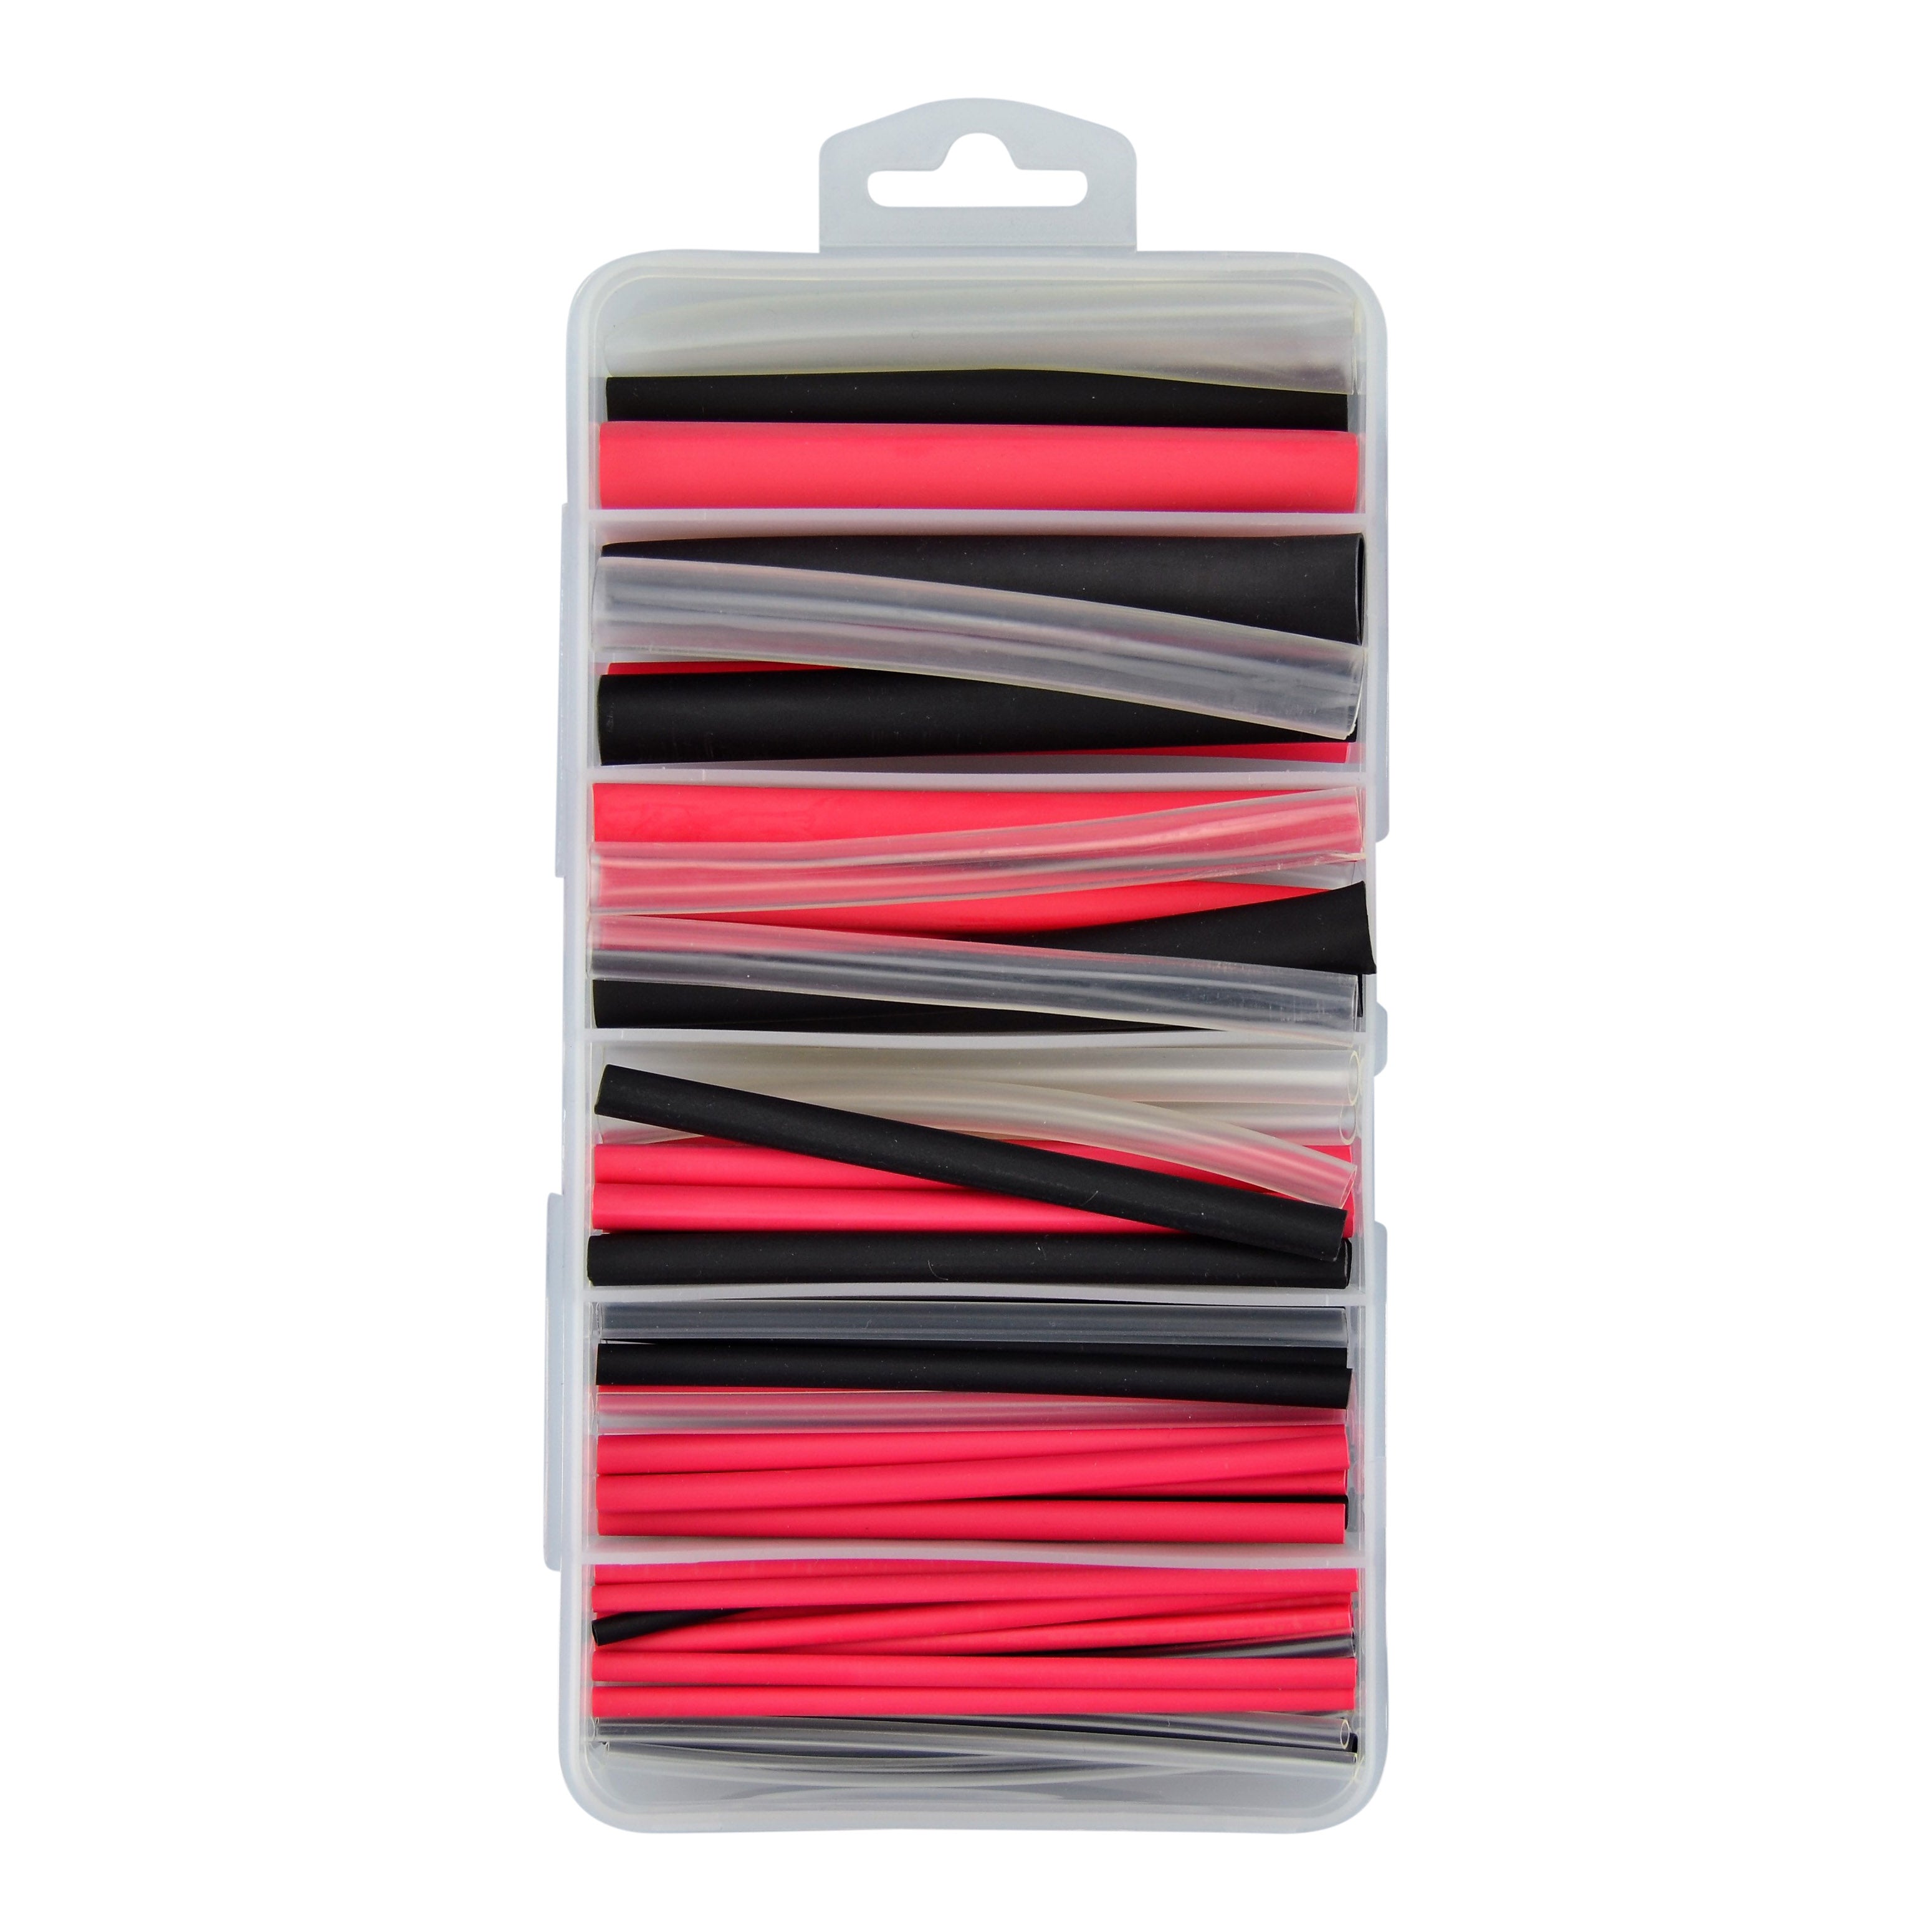 3:1 Ratio Dual Wall Adhesive-Lined Waterproof Black, Red & Clear Heat Shrink Assortment Kit - 87 Pcs Total